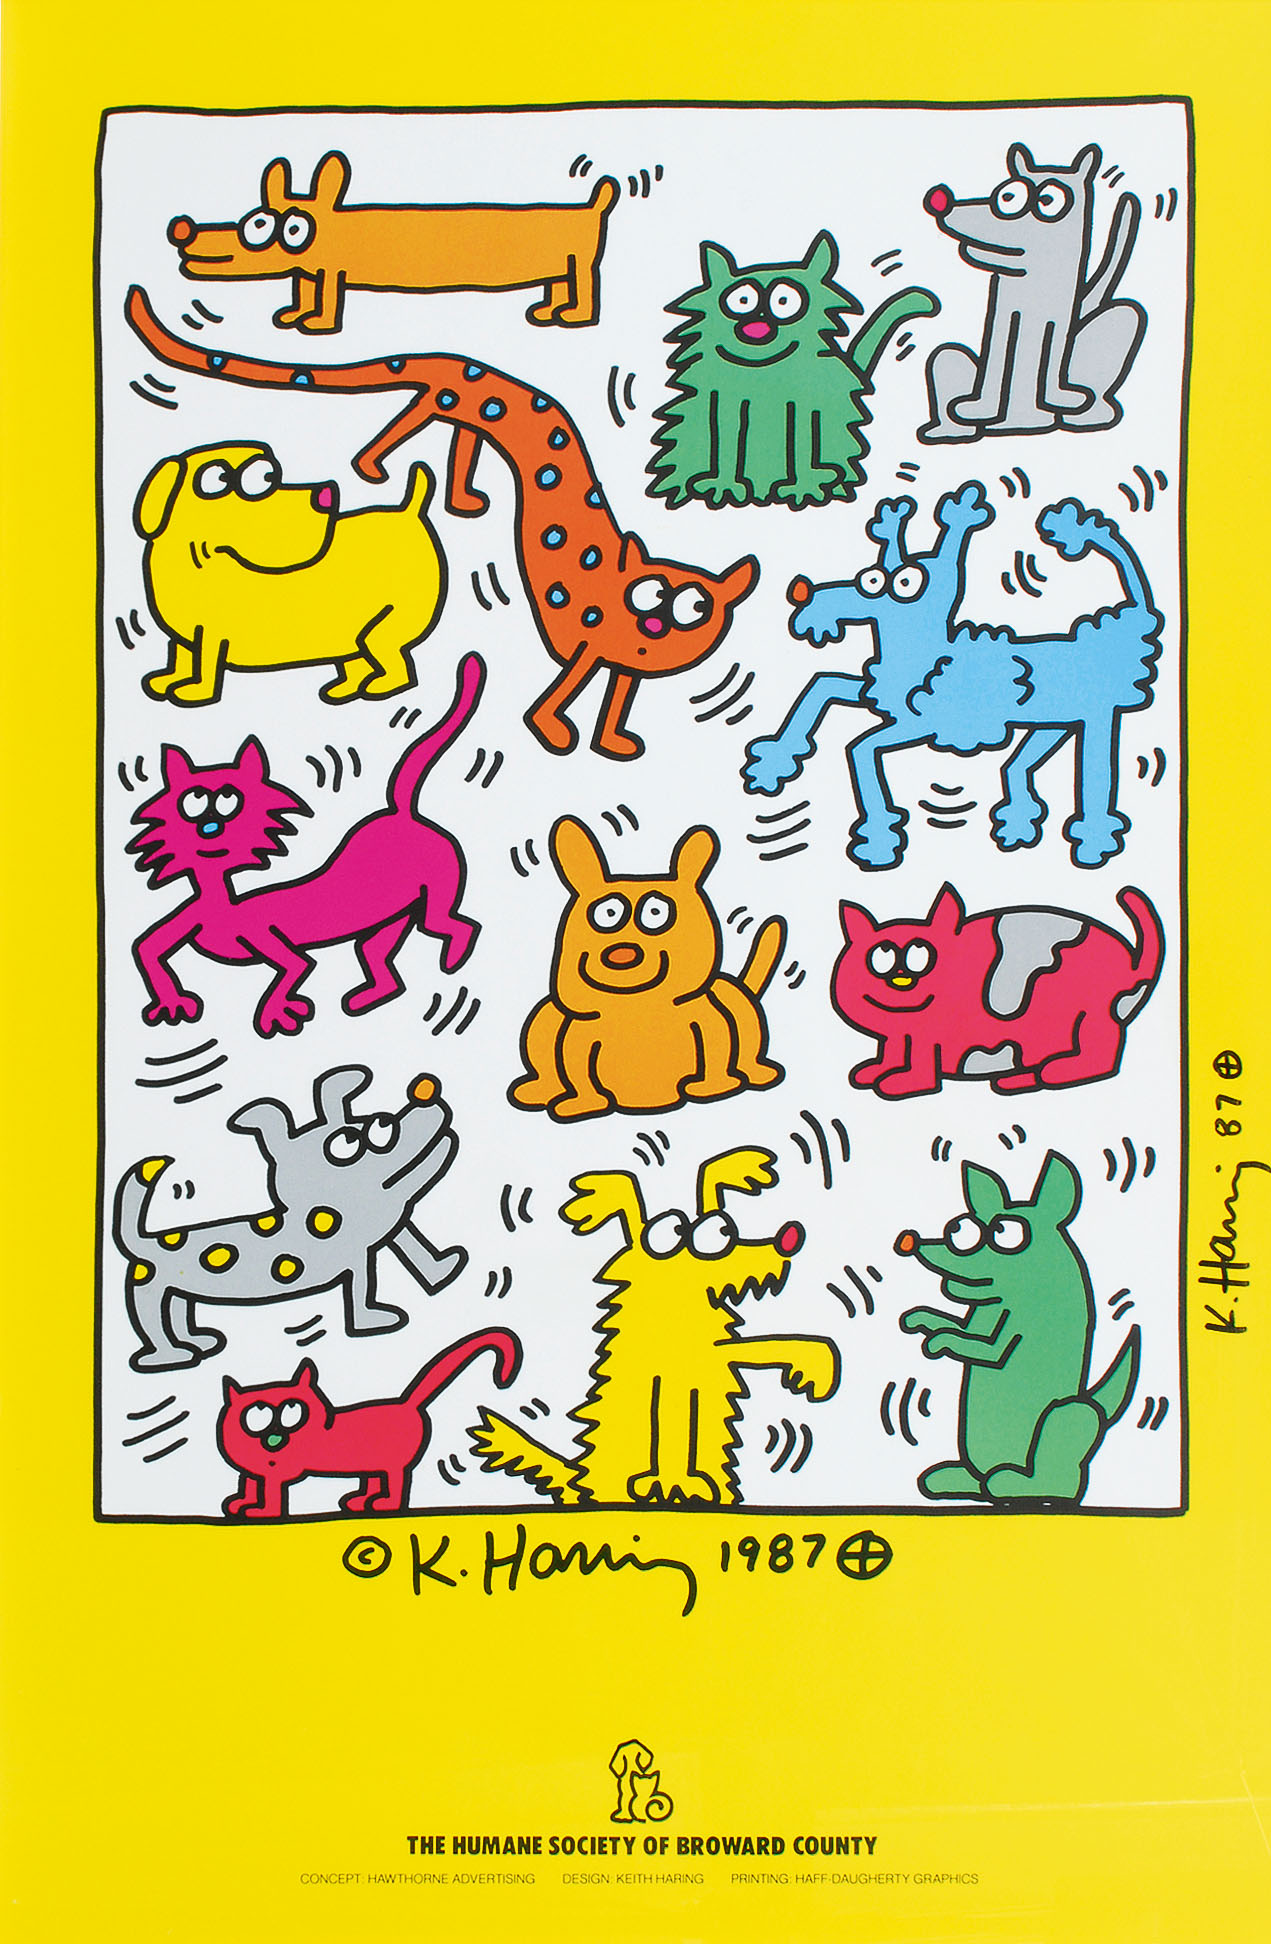 Handsigned poster: The Humane Society of Broward County 1987